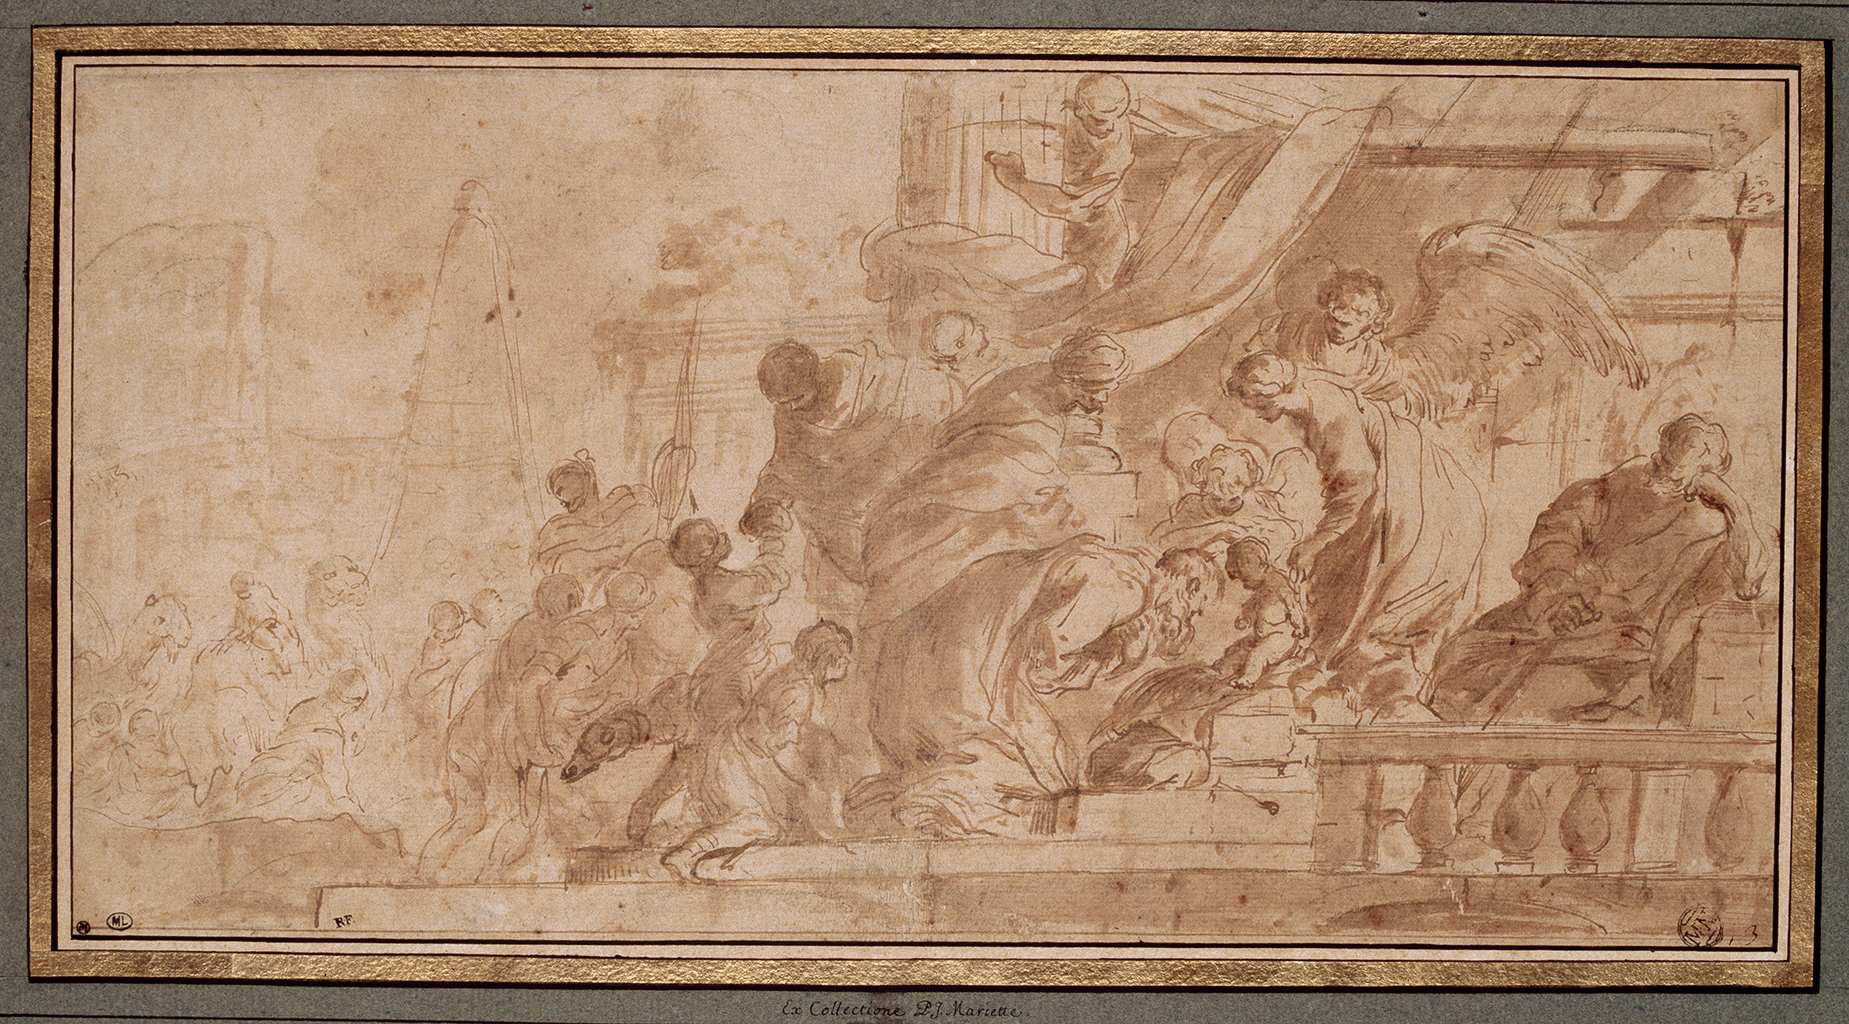 A photograph of a brown sketch that depicts a gathering of people on a large slab staircase surrounding a pillar. In the group there seems to be a mix of animals, children, and also biblical figures. In the background are the remains of large structures and buildings.